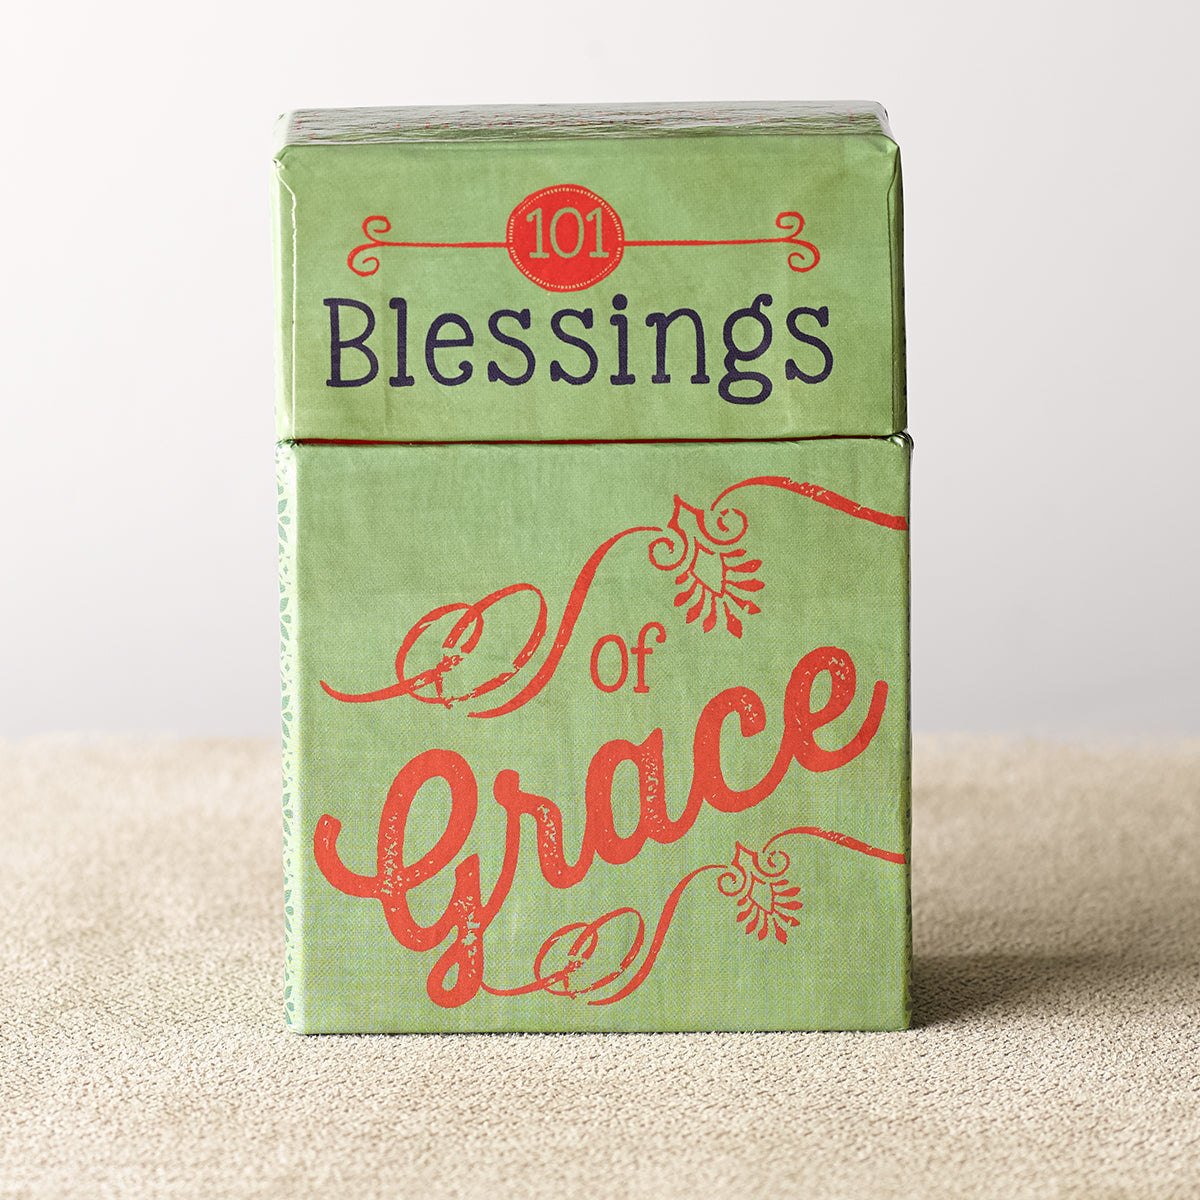 101 Blessings of Grace Box of Blessings - The Christian Gift Company